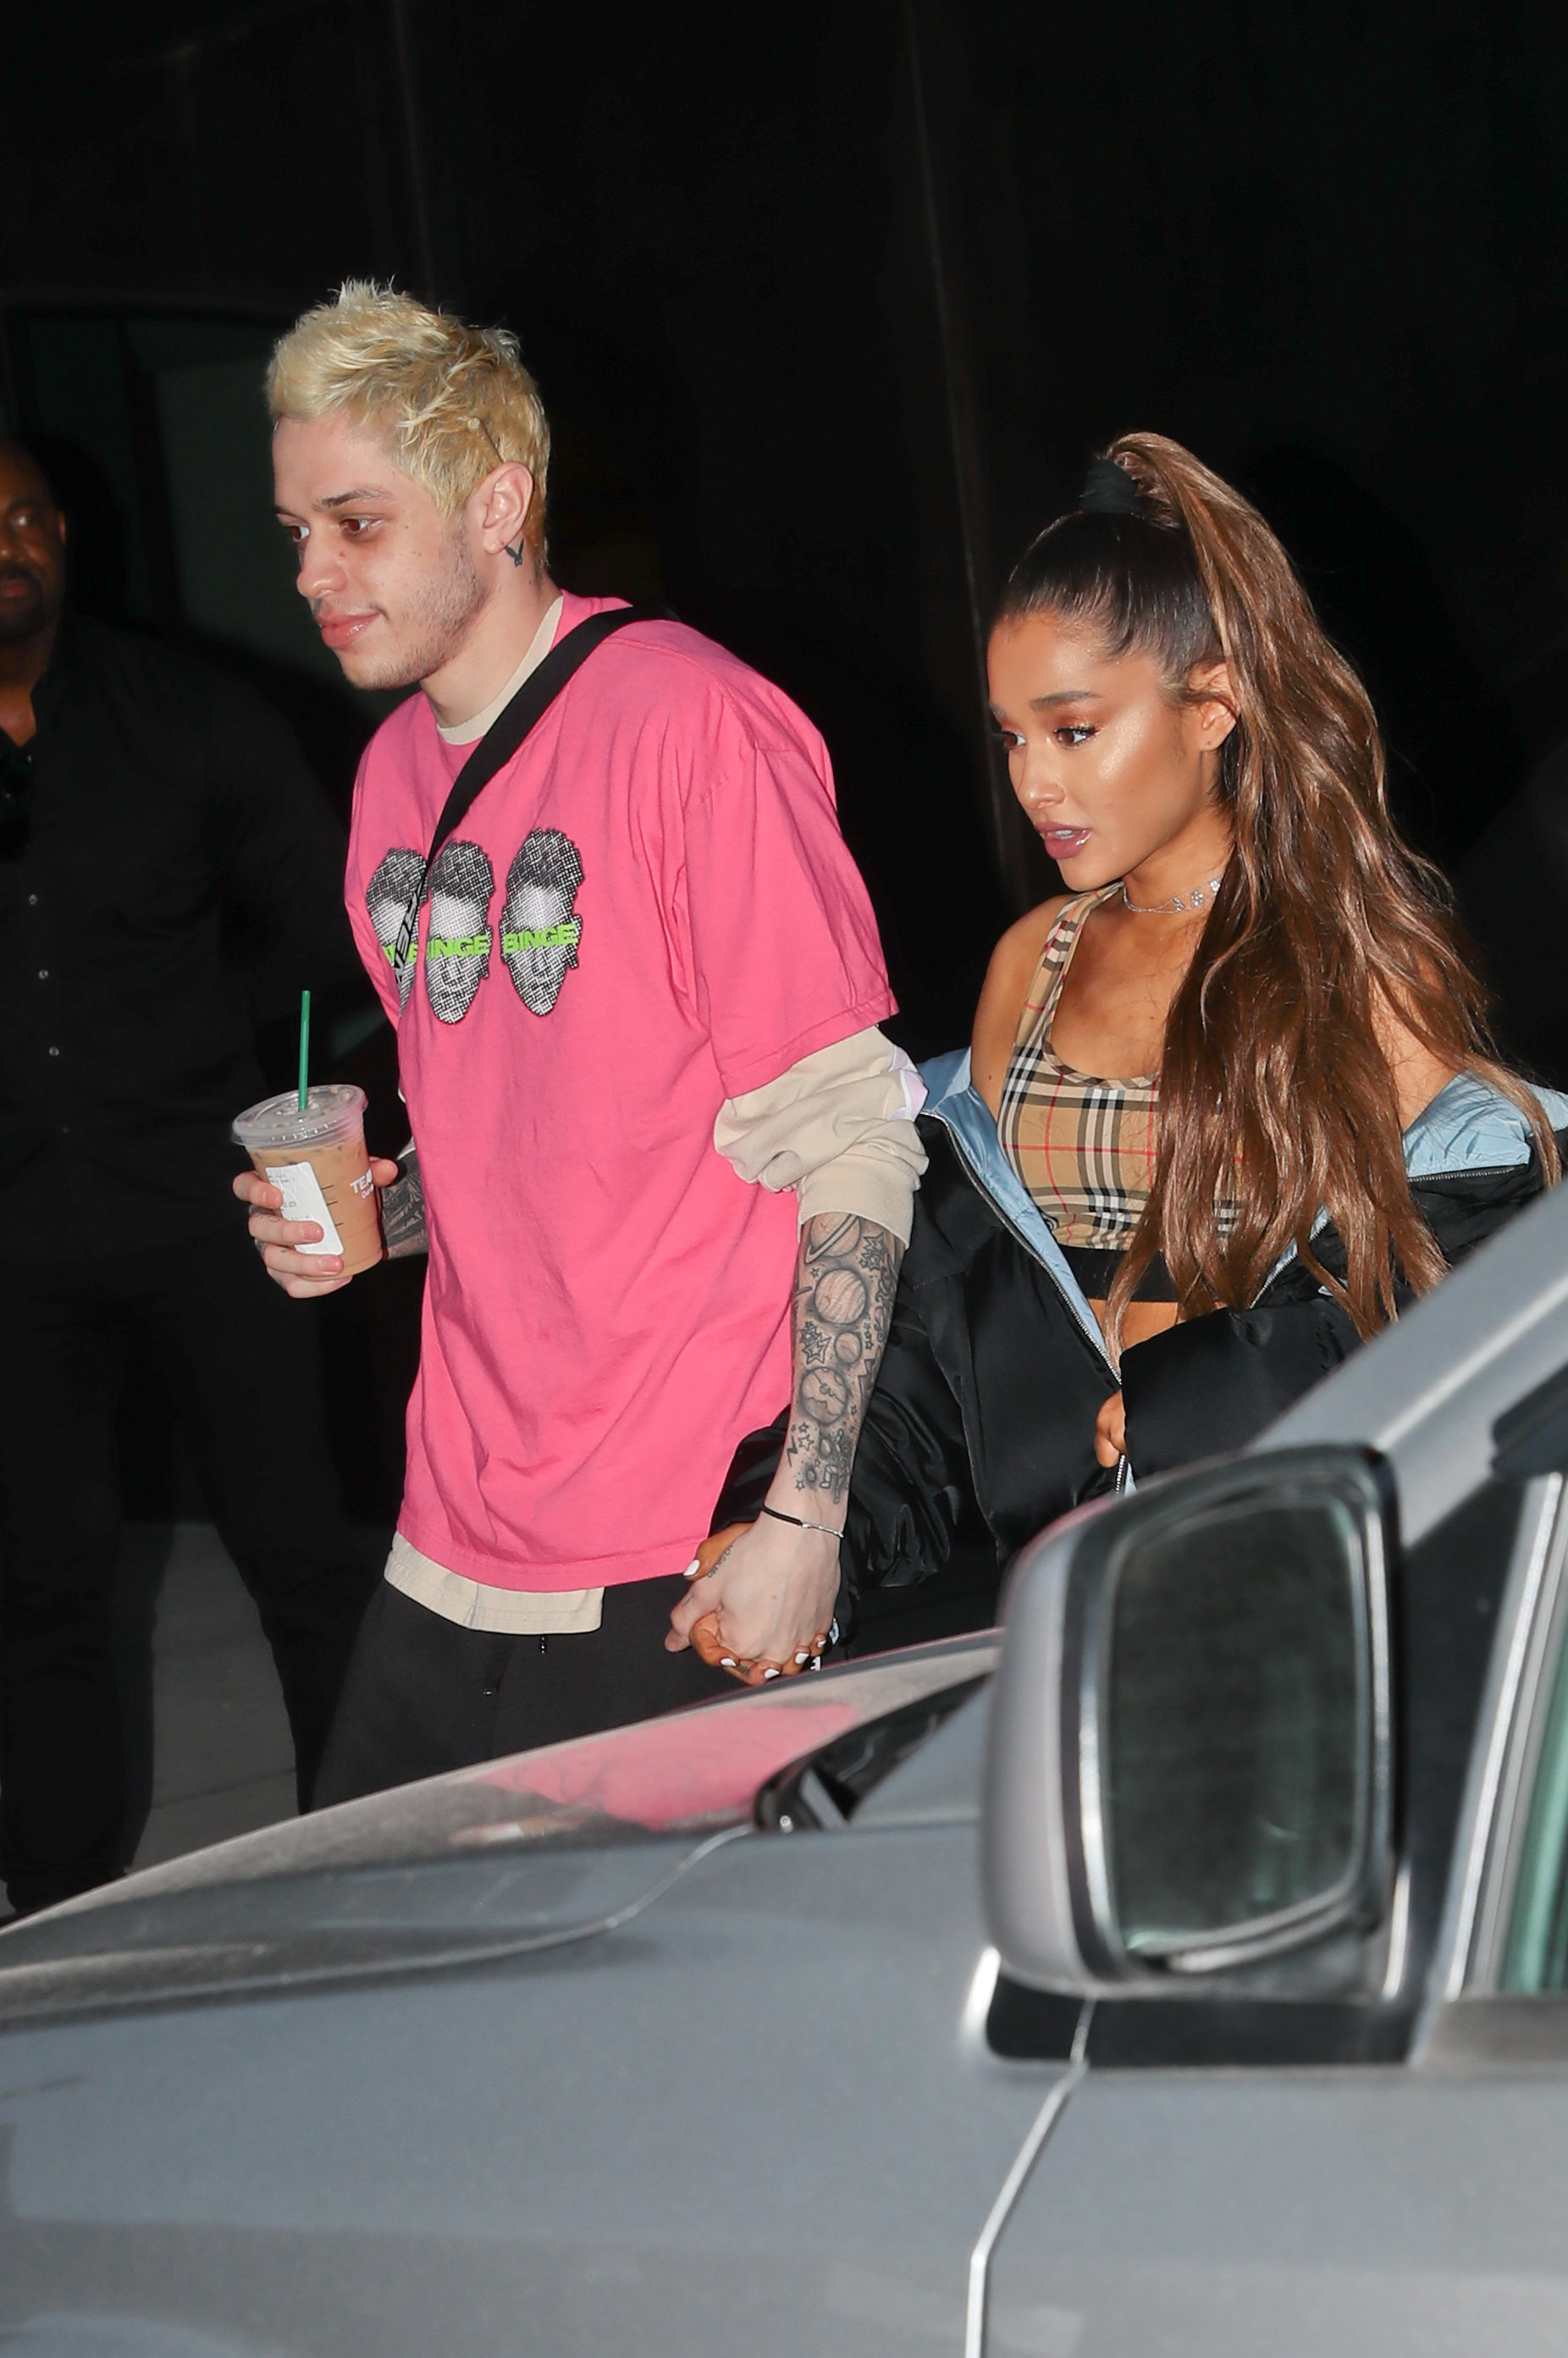 Ariana Grande's Engagement Ring From Pete Davidson: The Details